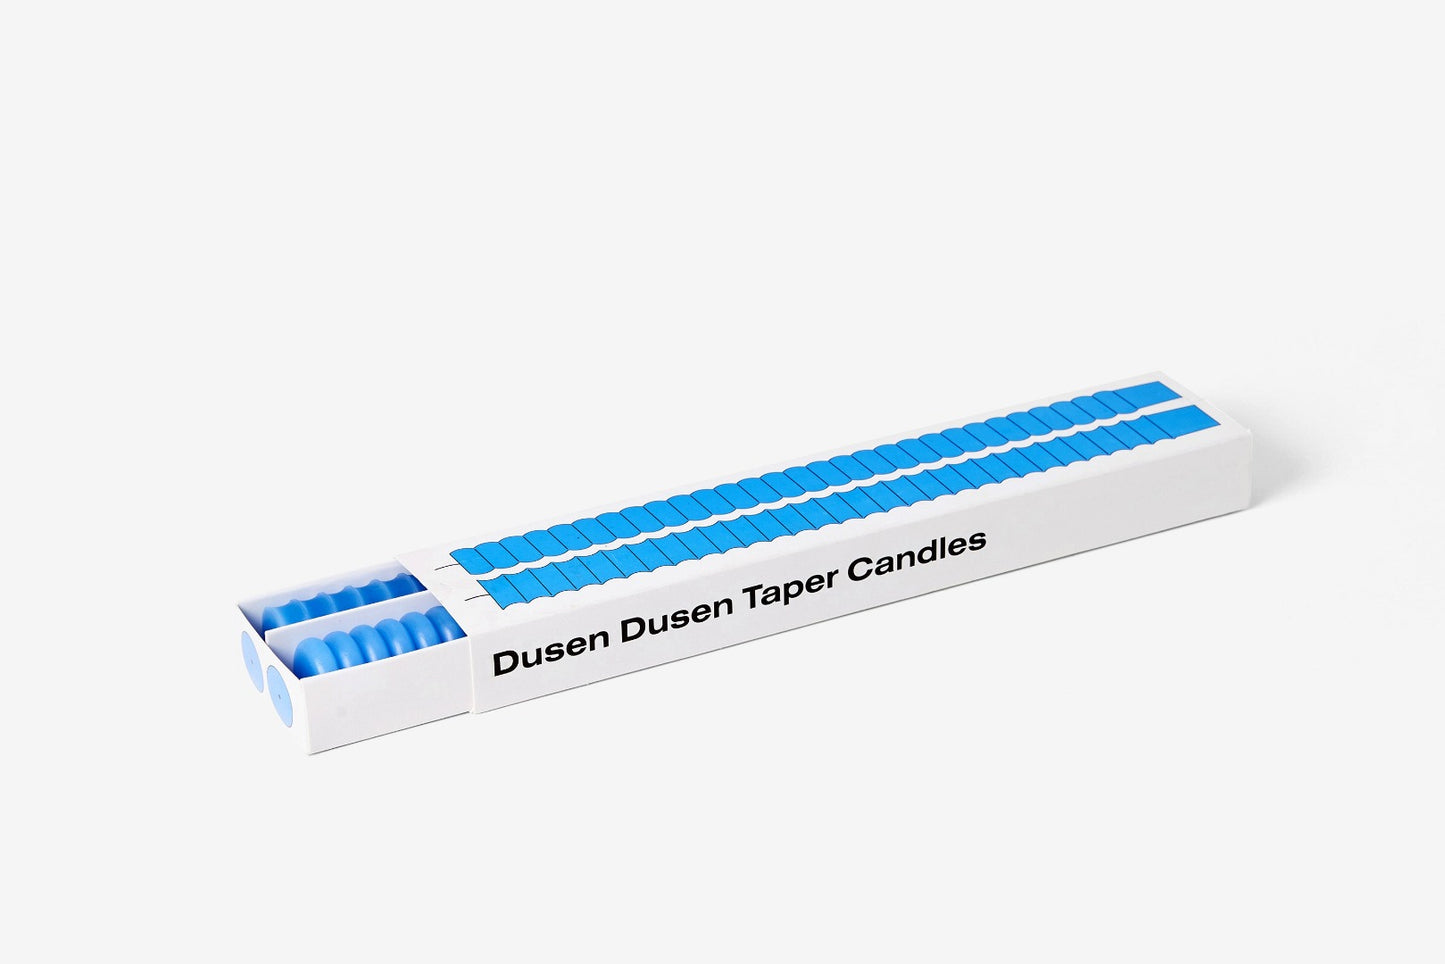 two blue candles in a box with an image of the candles and text reading 'Dunsen Dunsen Taper Candles' - one candle has convex bumps and the other has concave dips.